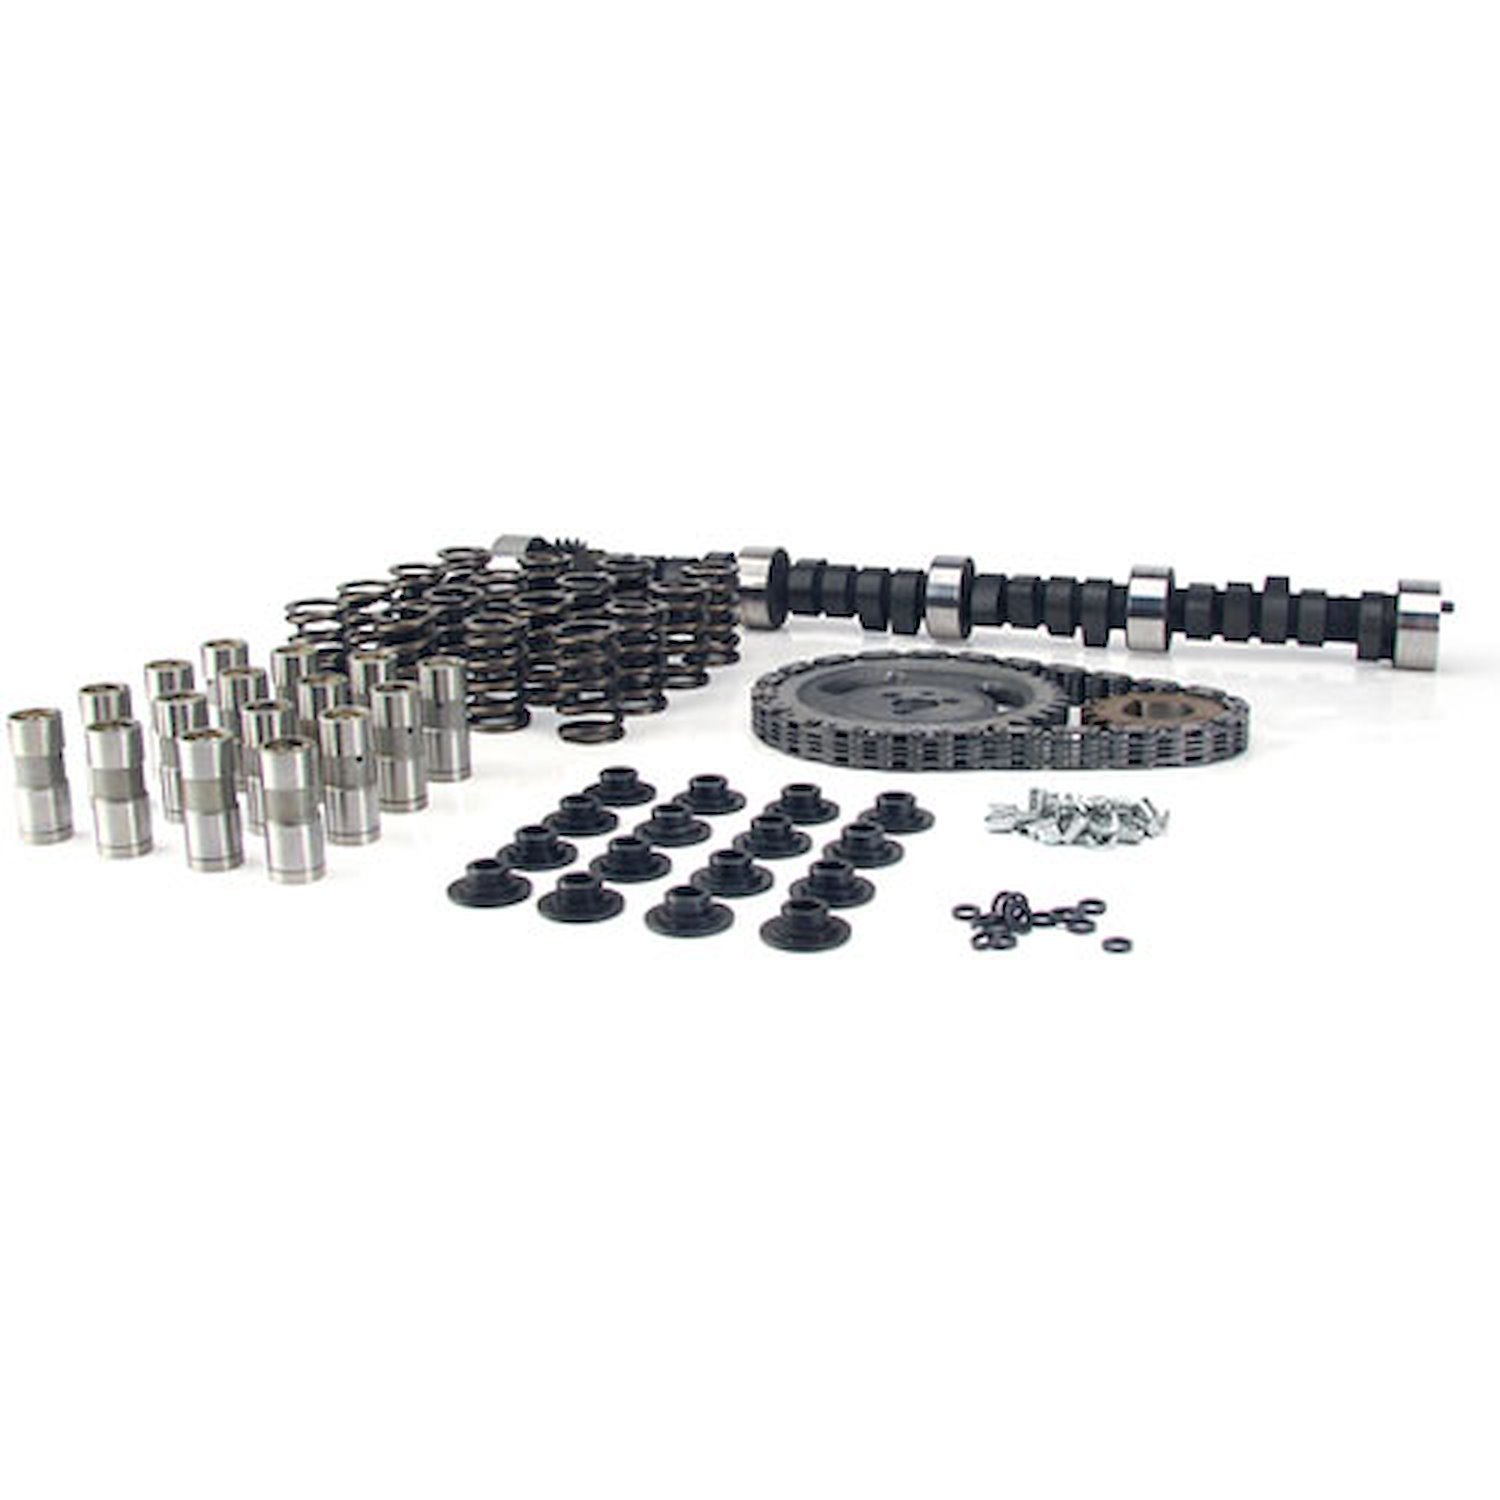 Xtreme Energy 284H Hydraulic Flat Tappet Camshaft Complete Kit Lift: .507"/.510" Duration: 284°/296° RPM Range: 2300-6500